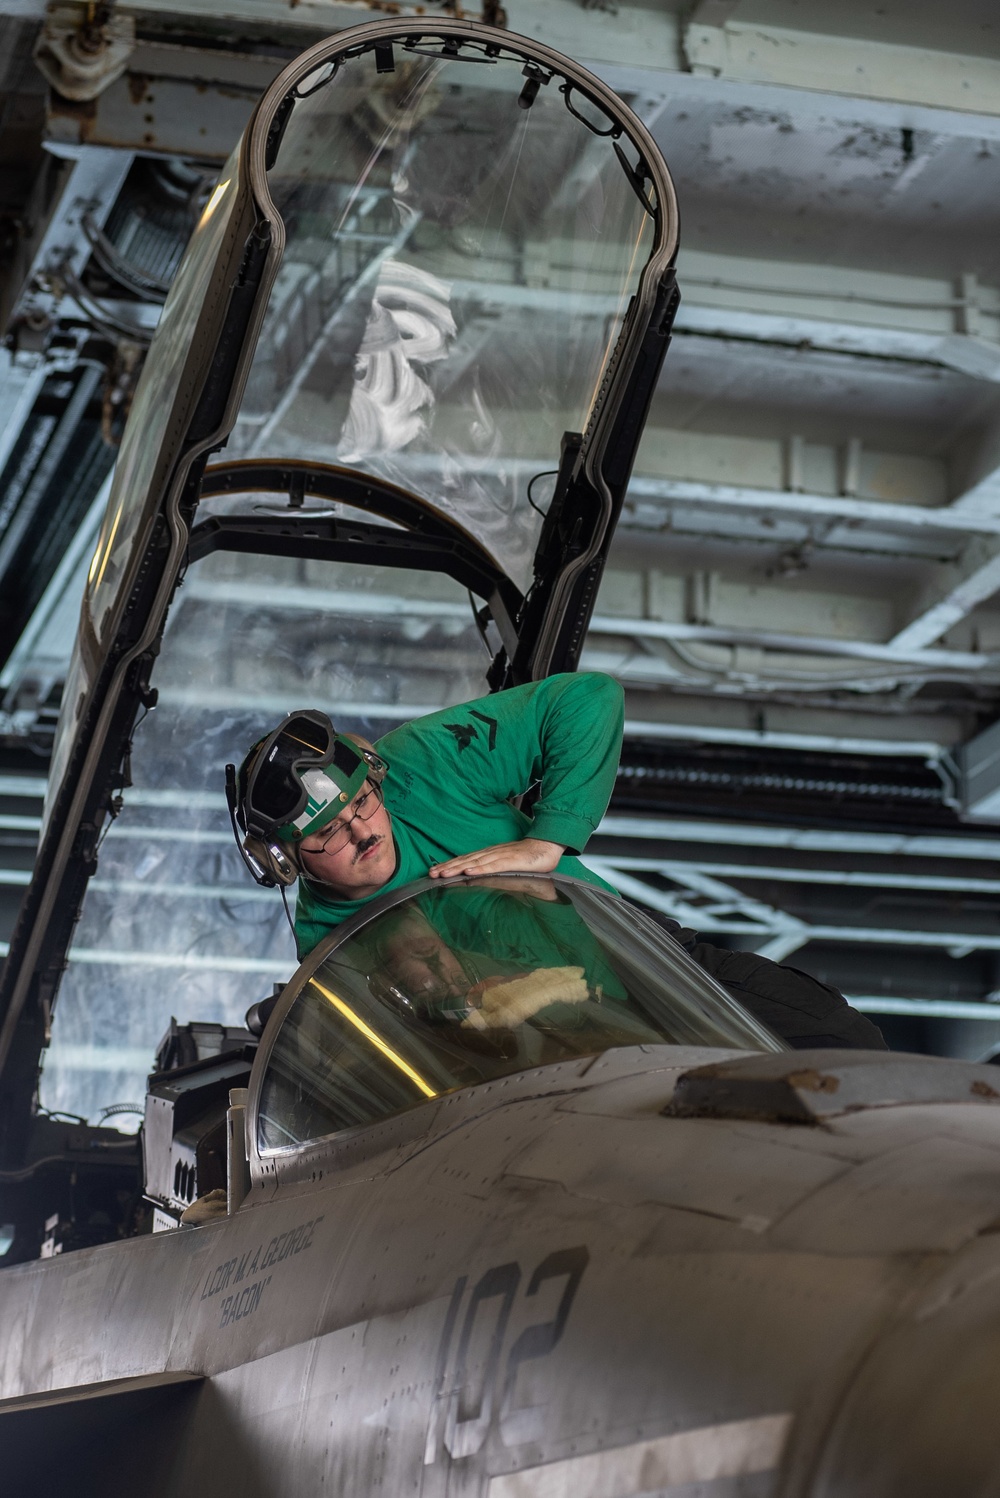 U.S. Sailor cleans the windshield of an F/A-18F Super Hornet